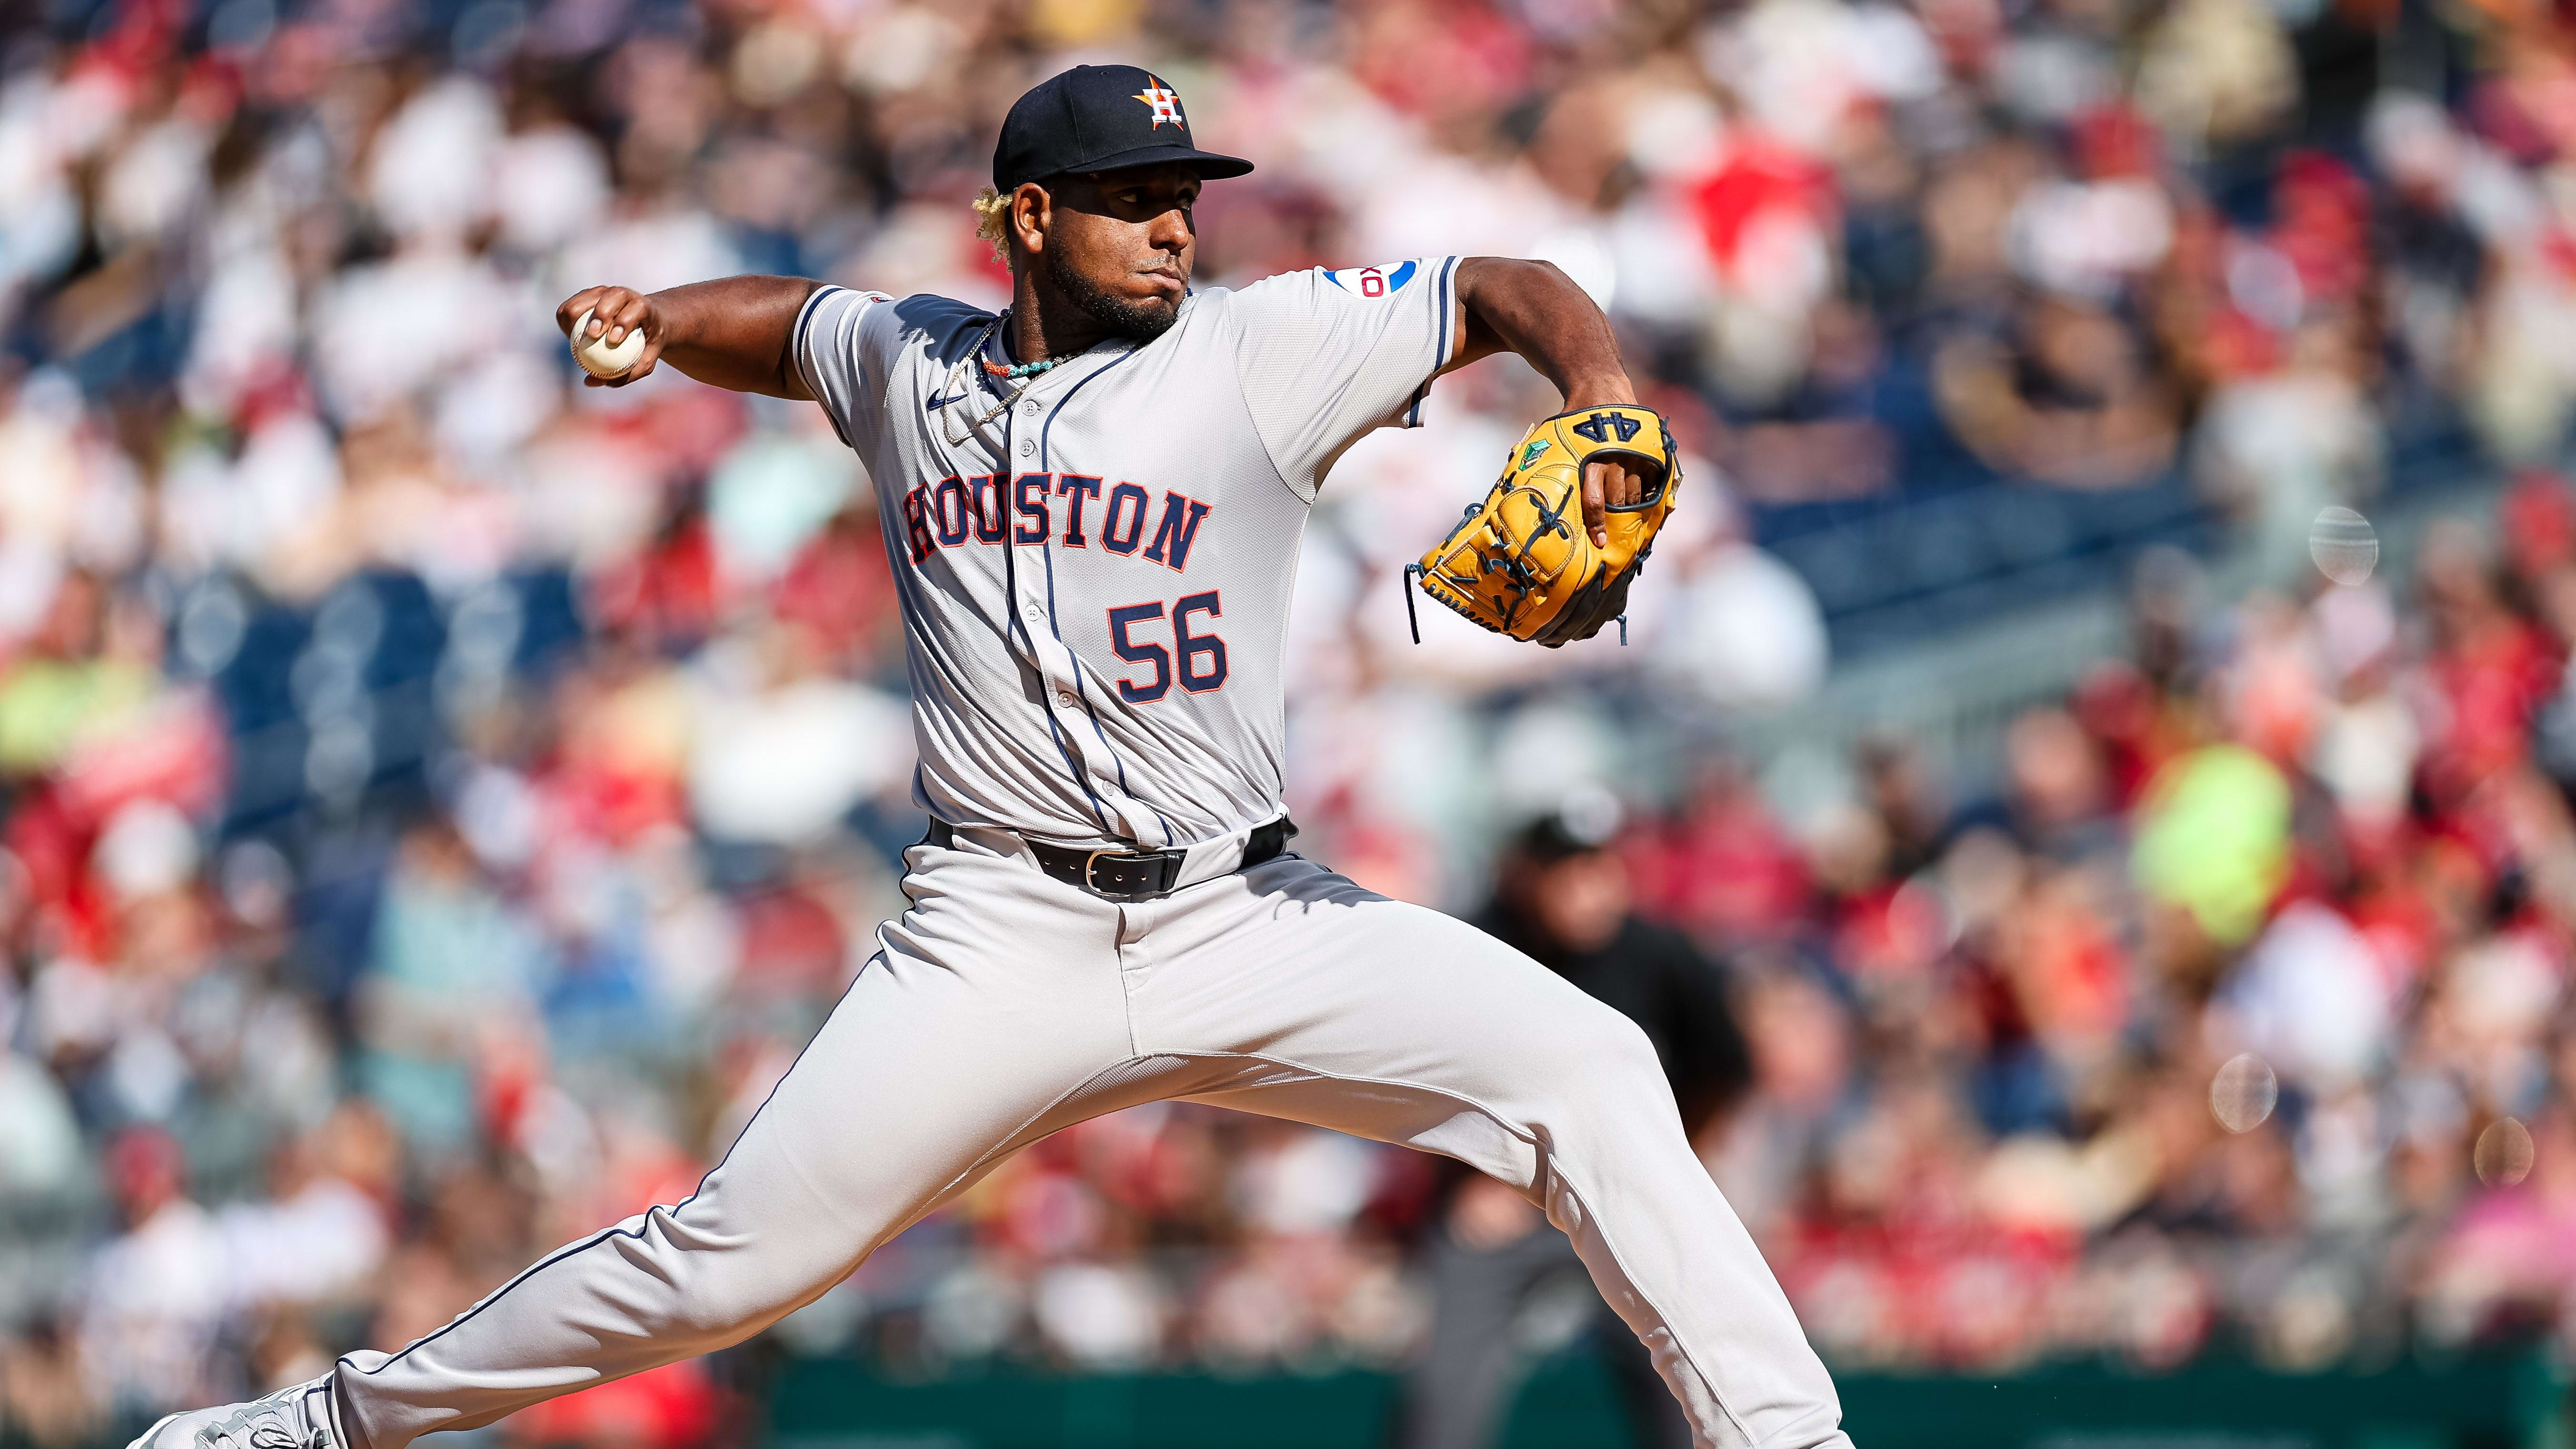 Houston Astros’ Ronel Blanco: Stellar Start Amidst Missed History in Loss to Nationals